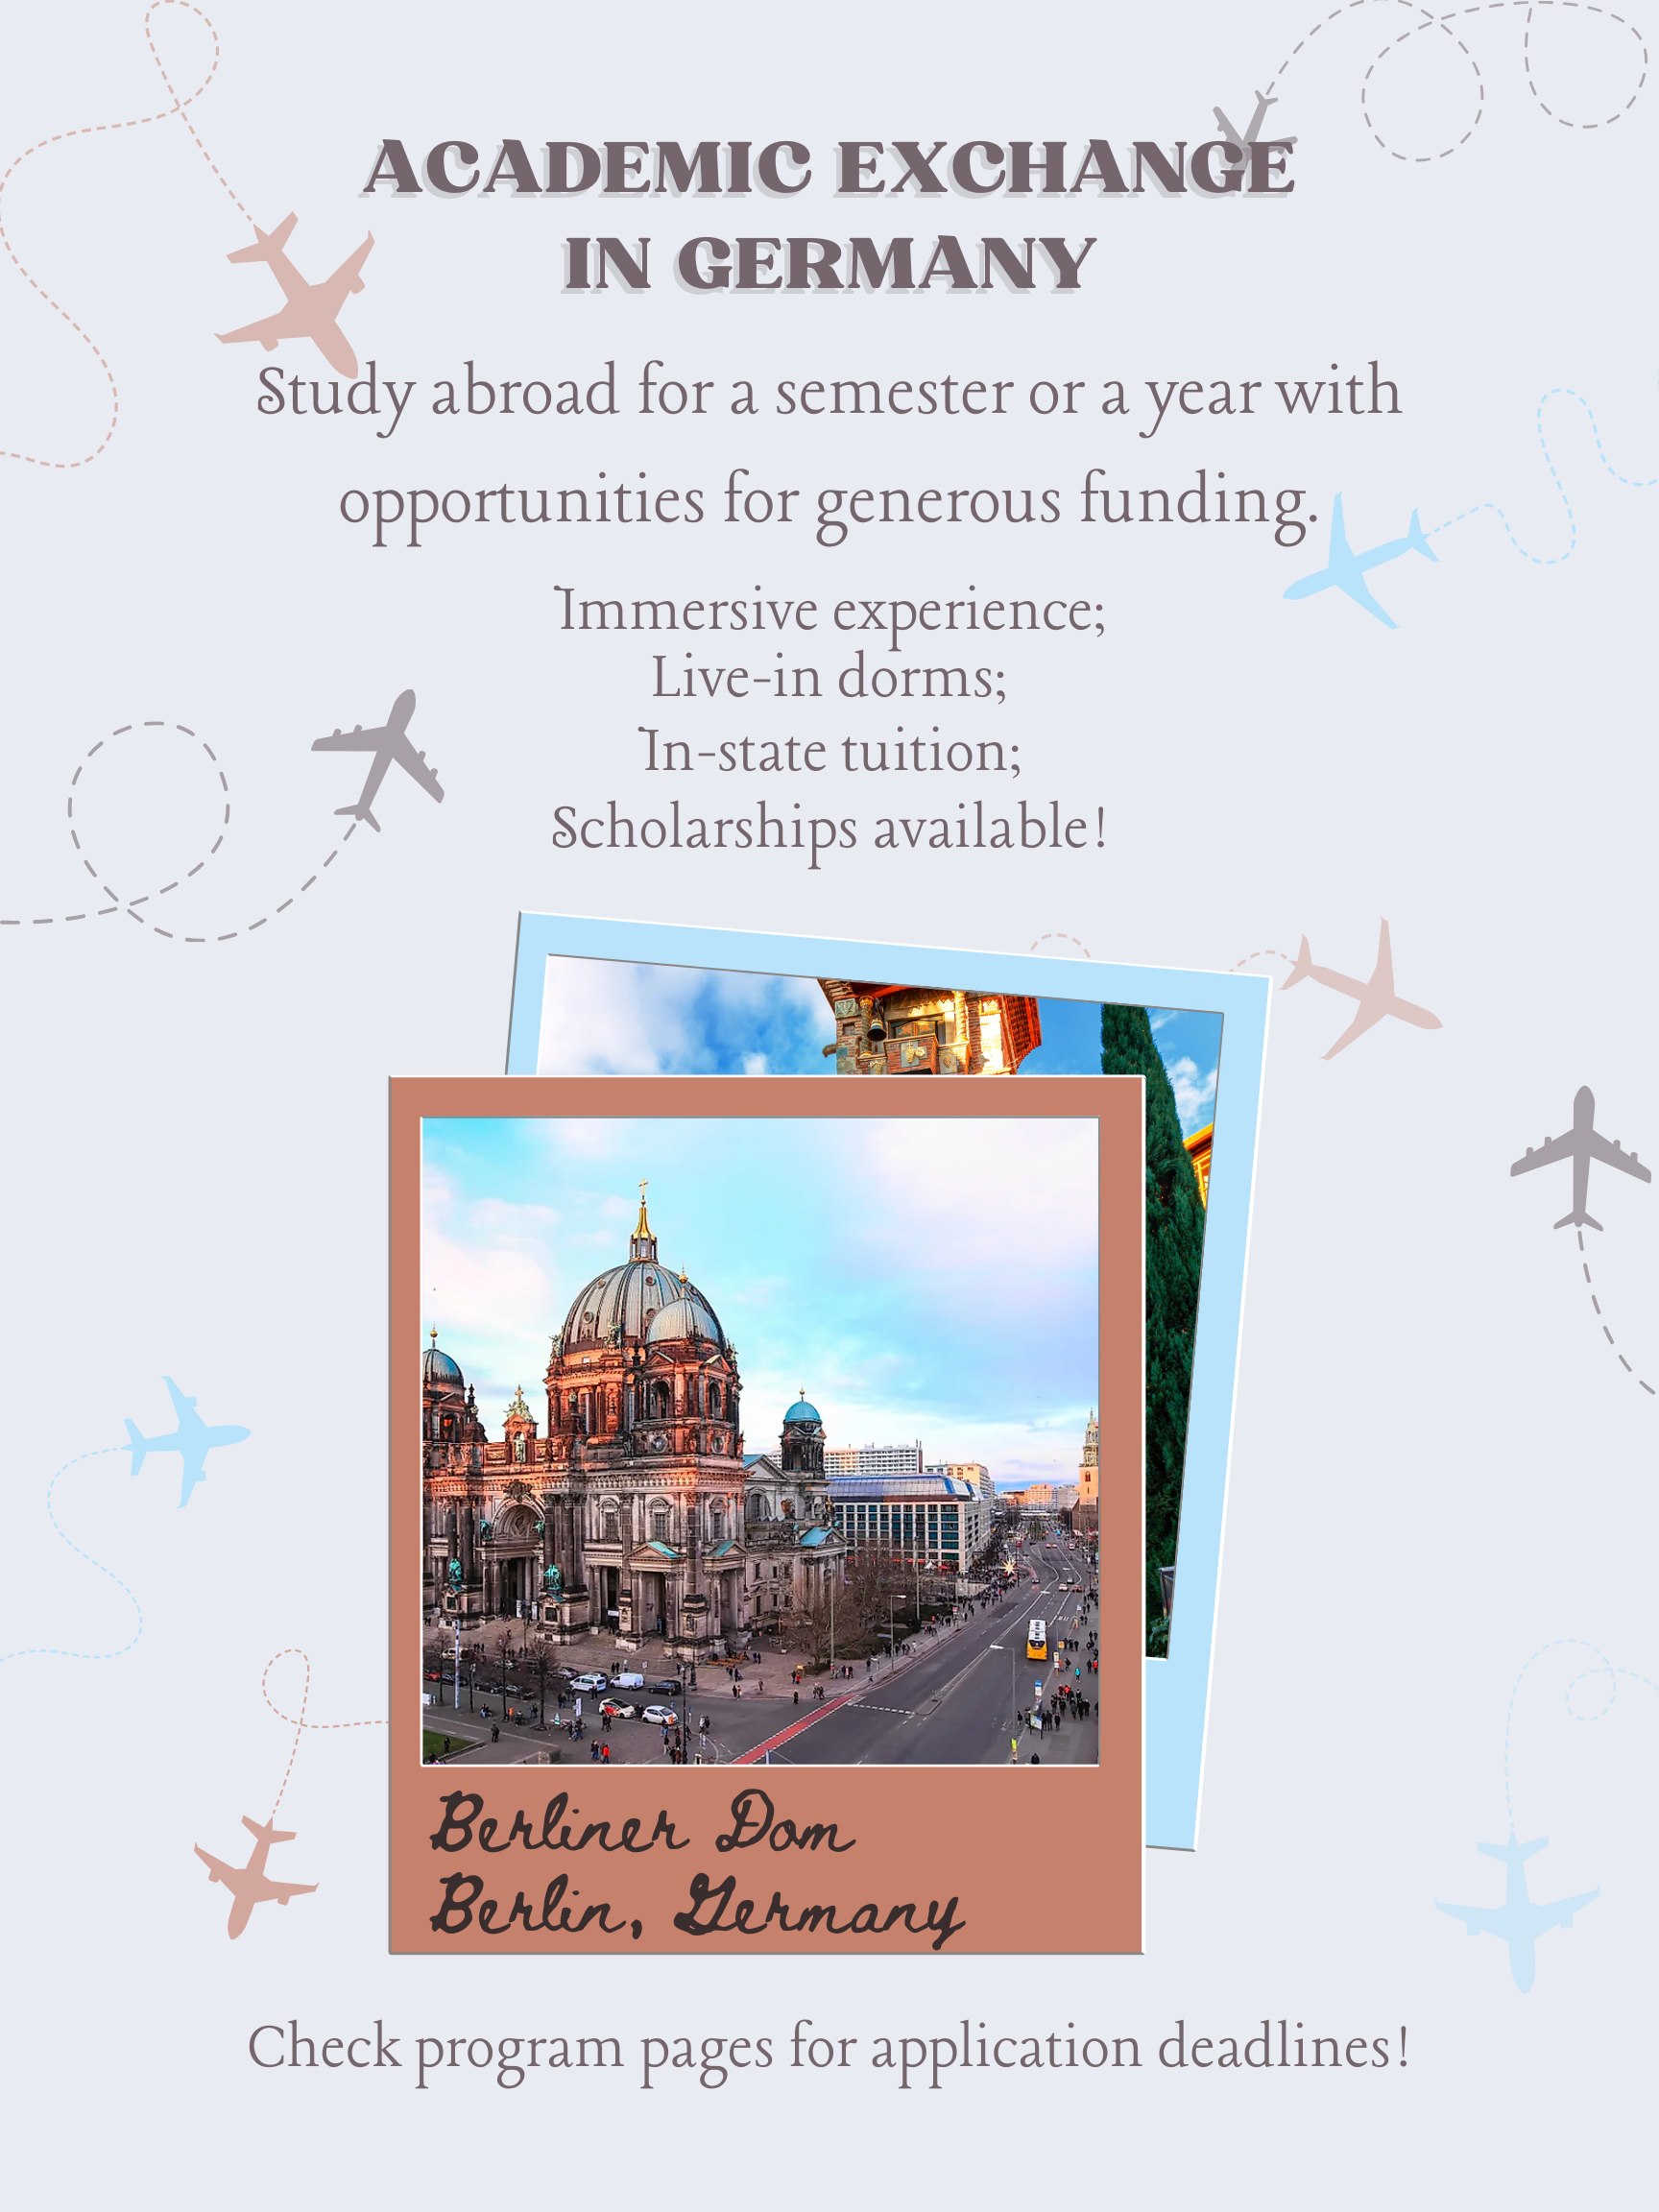 Academic Exchange in Germany. Study abroad for a semester or a year with opportunities for generous funding. Immersive experience; Live-in dorms; In-state tuition; Scholarships available! Check program pages for application deadlines! [In the middle of the flyer are two polaroid photos one laid over the other. The one on top has a picture of the Berliner Dom and has a handwritten note on the polaroid that identifies it as the Berliner Dom in Berlin, Germany].